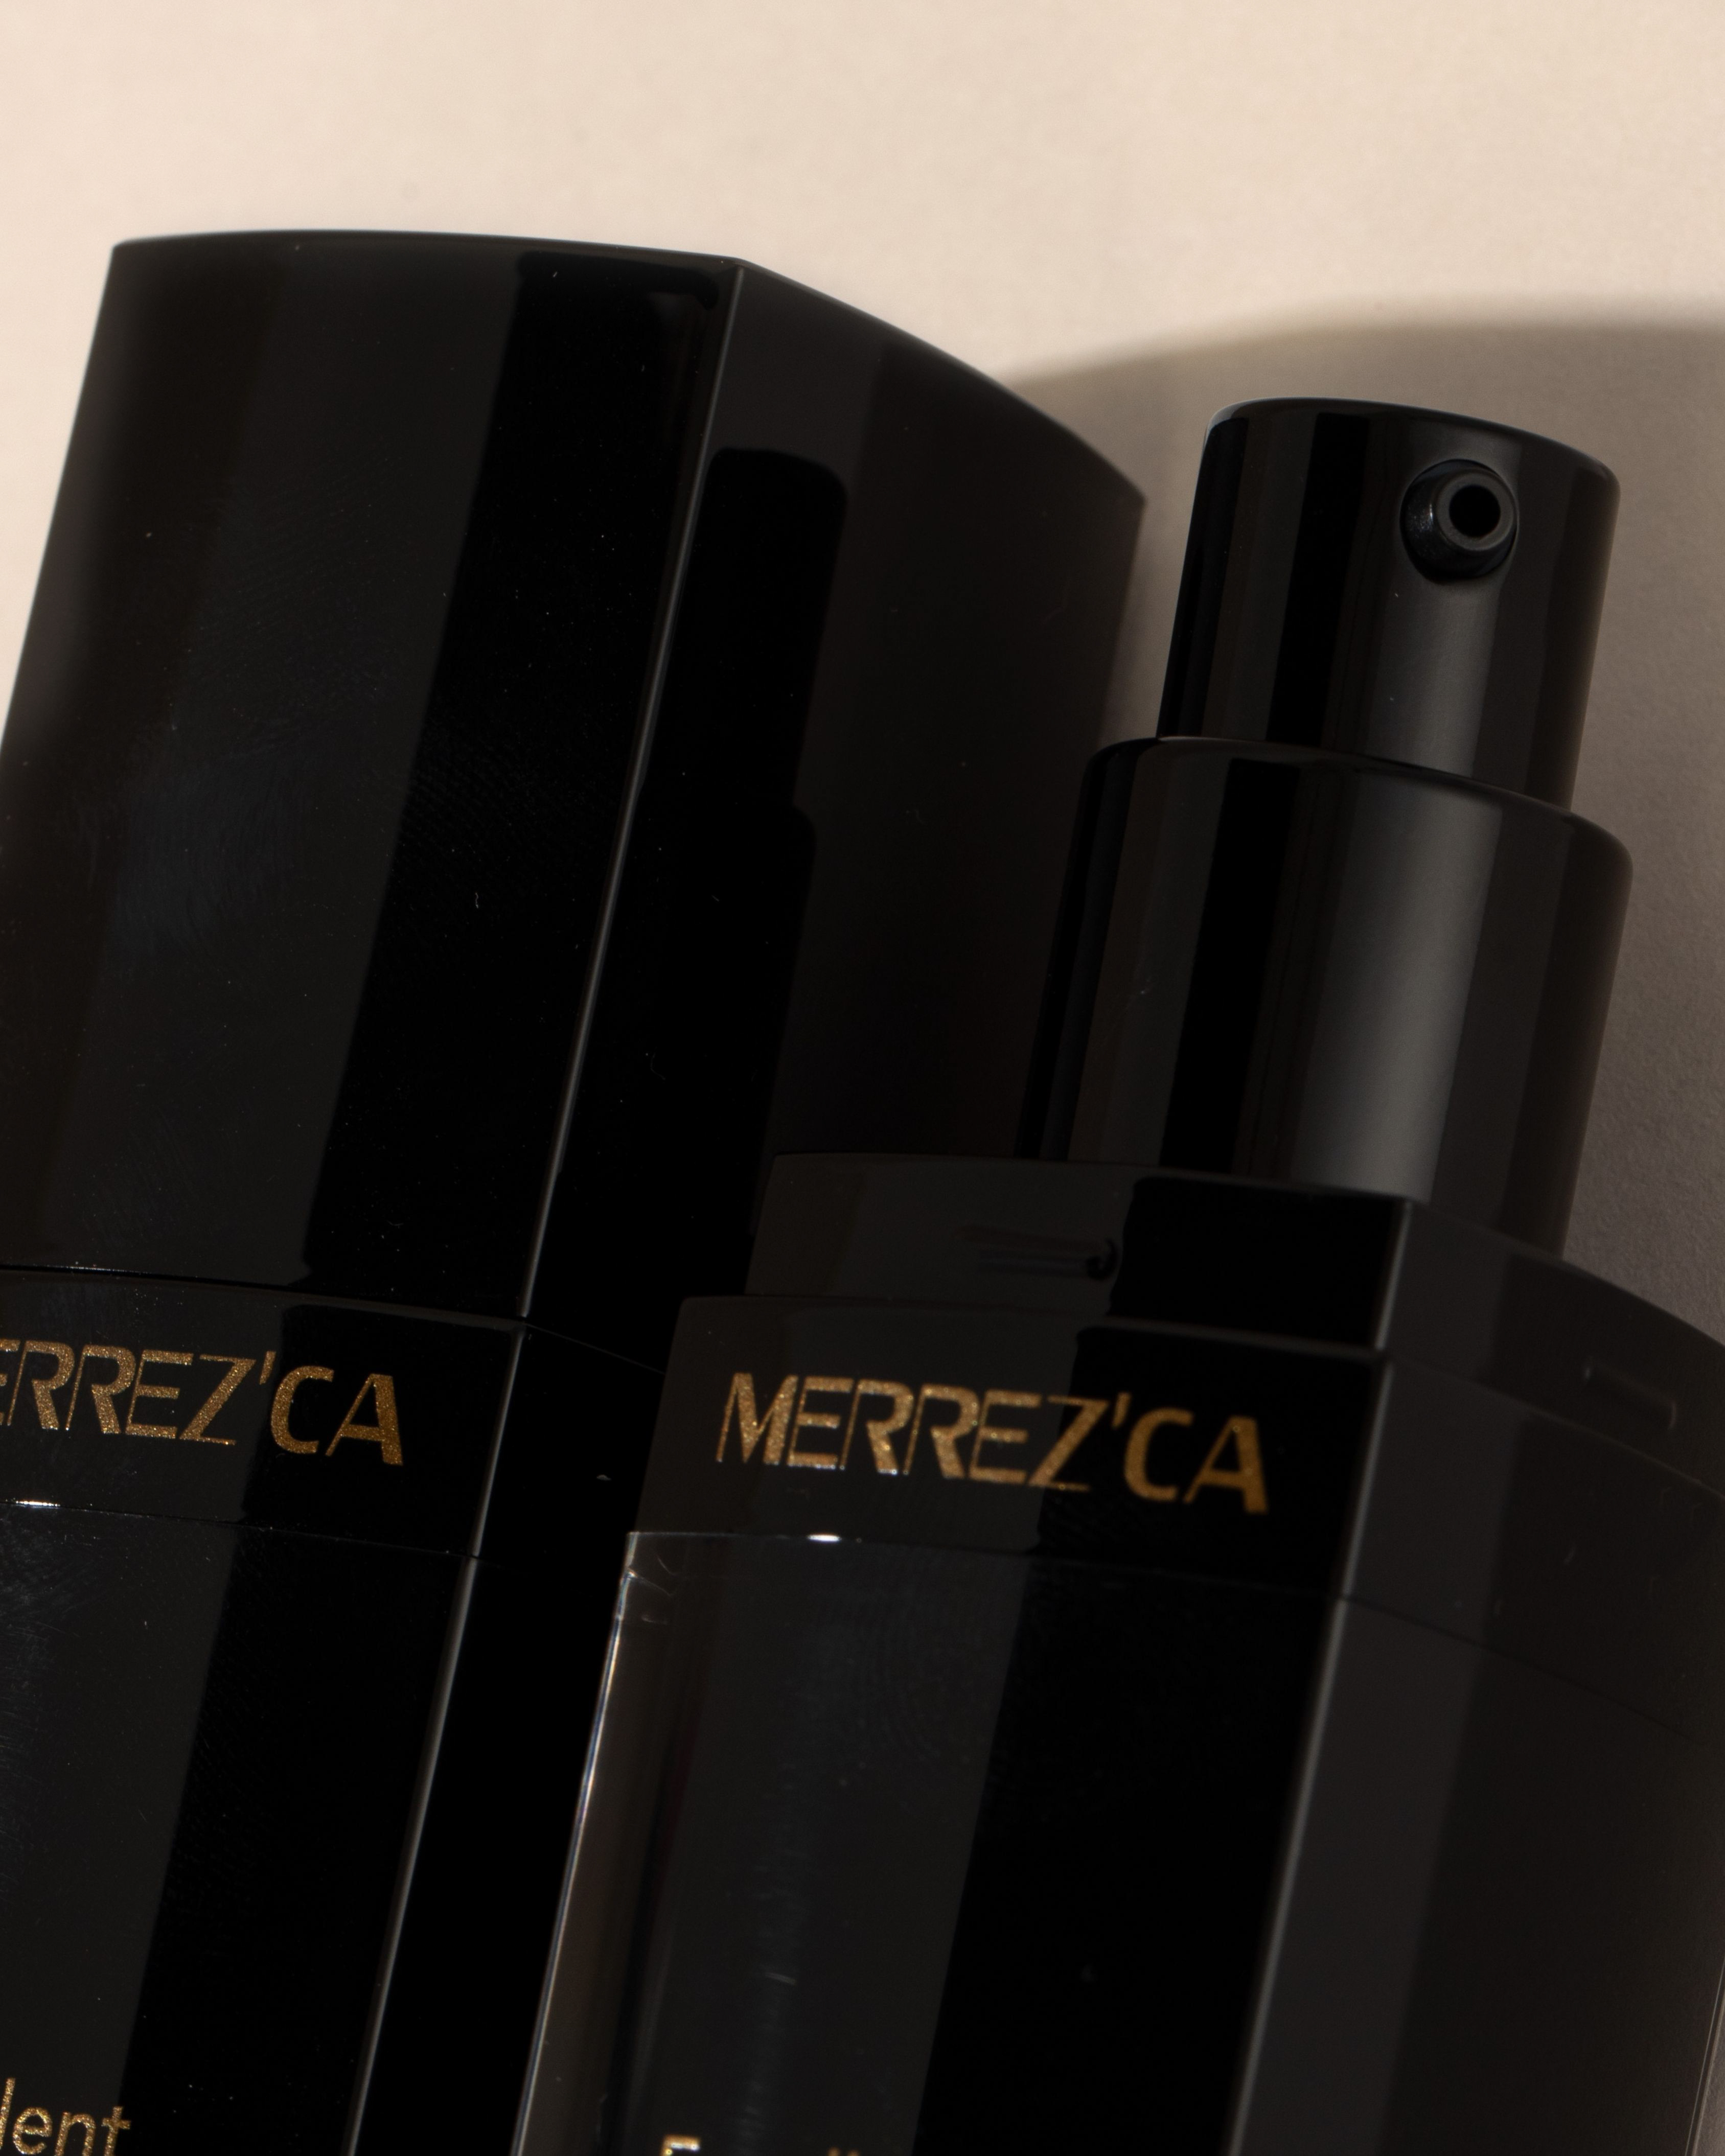 Merrezca  Excellent Covering Skin Perfecting Foundation SPF50/PA+++